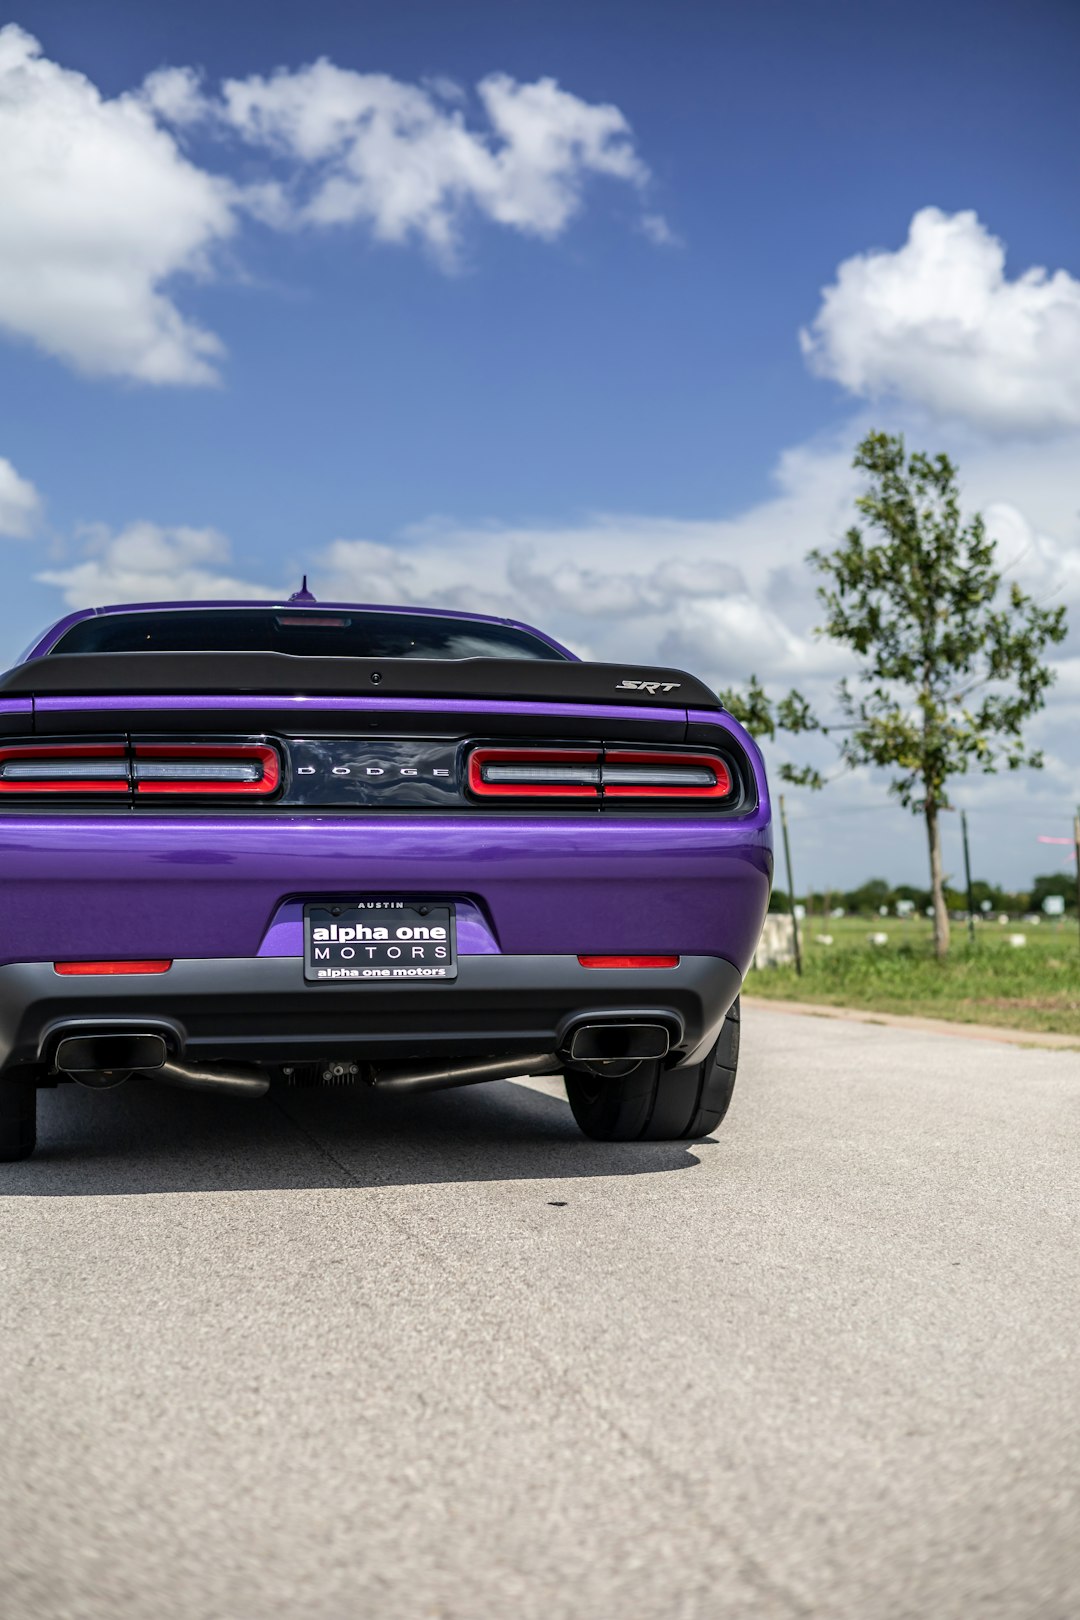 purple chevrolet car on road during daytime